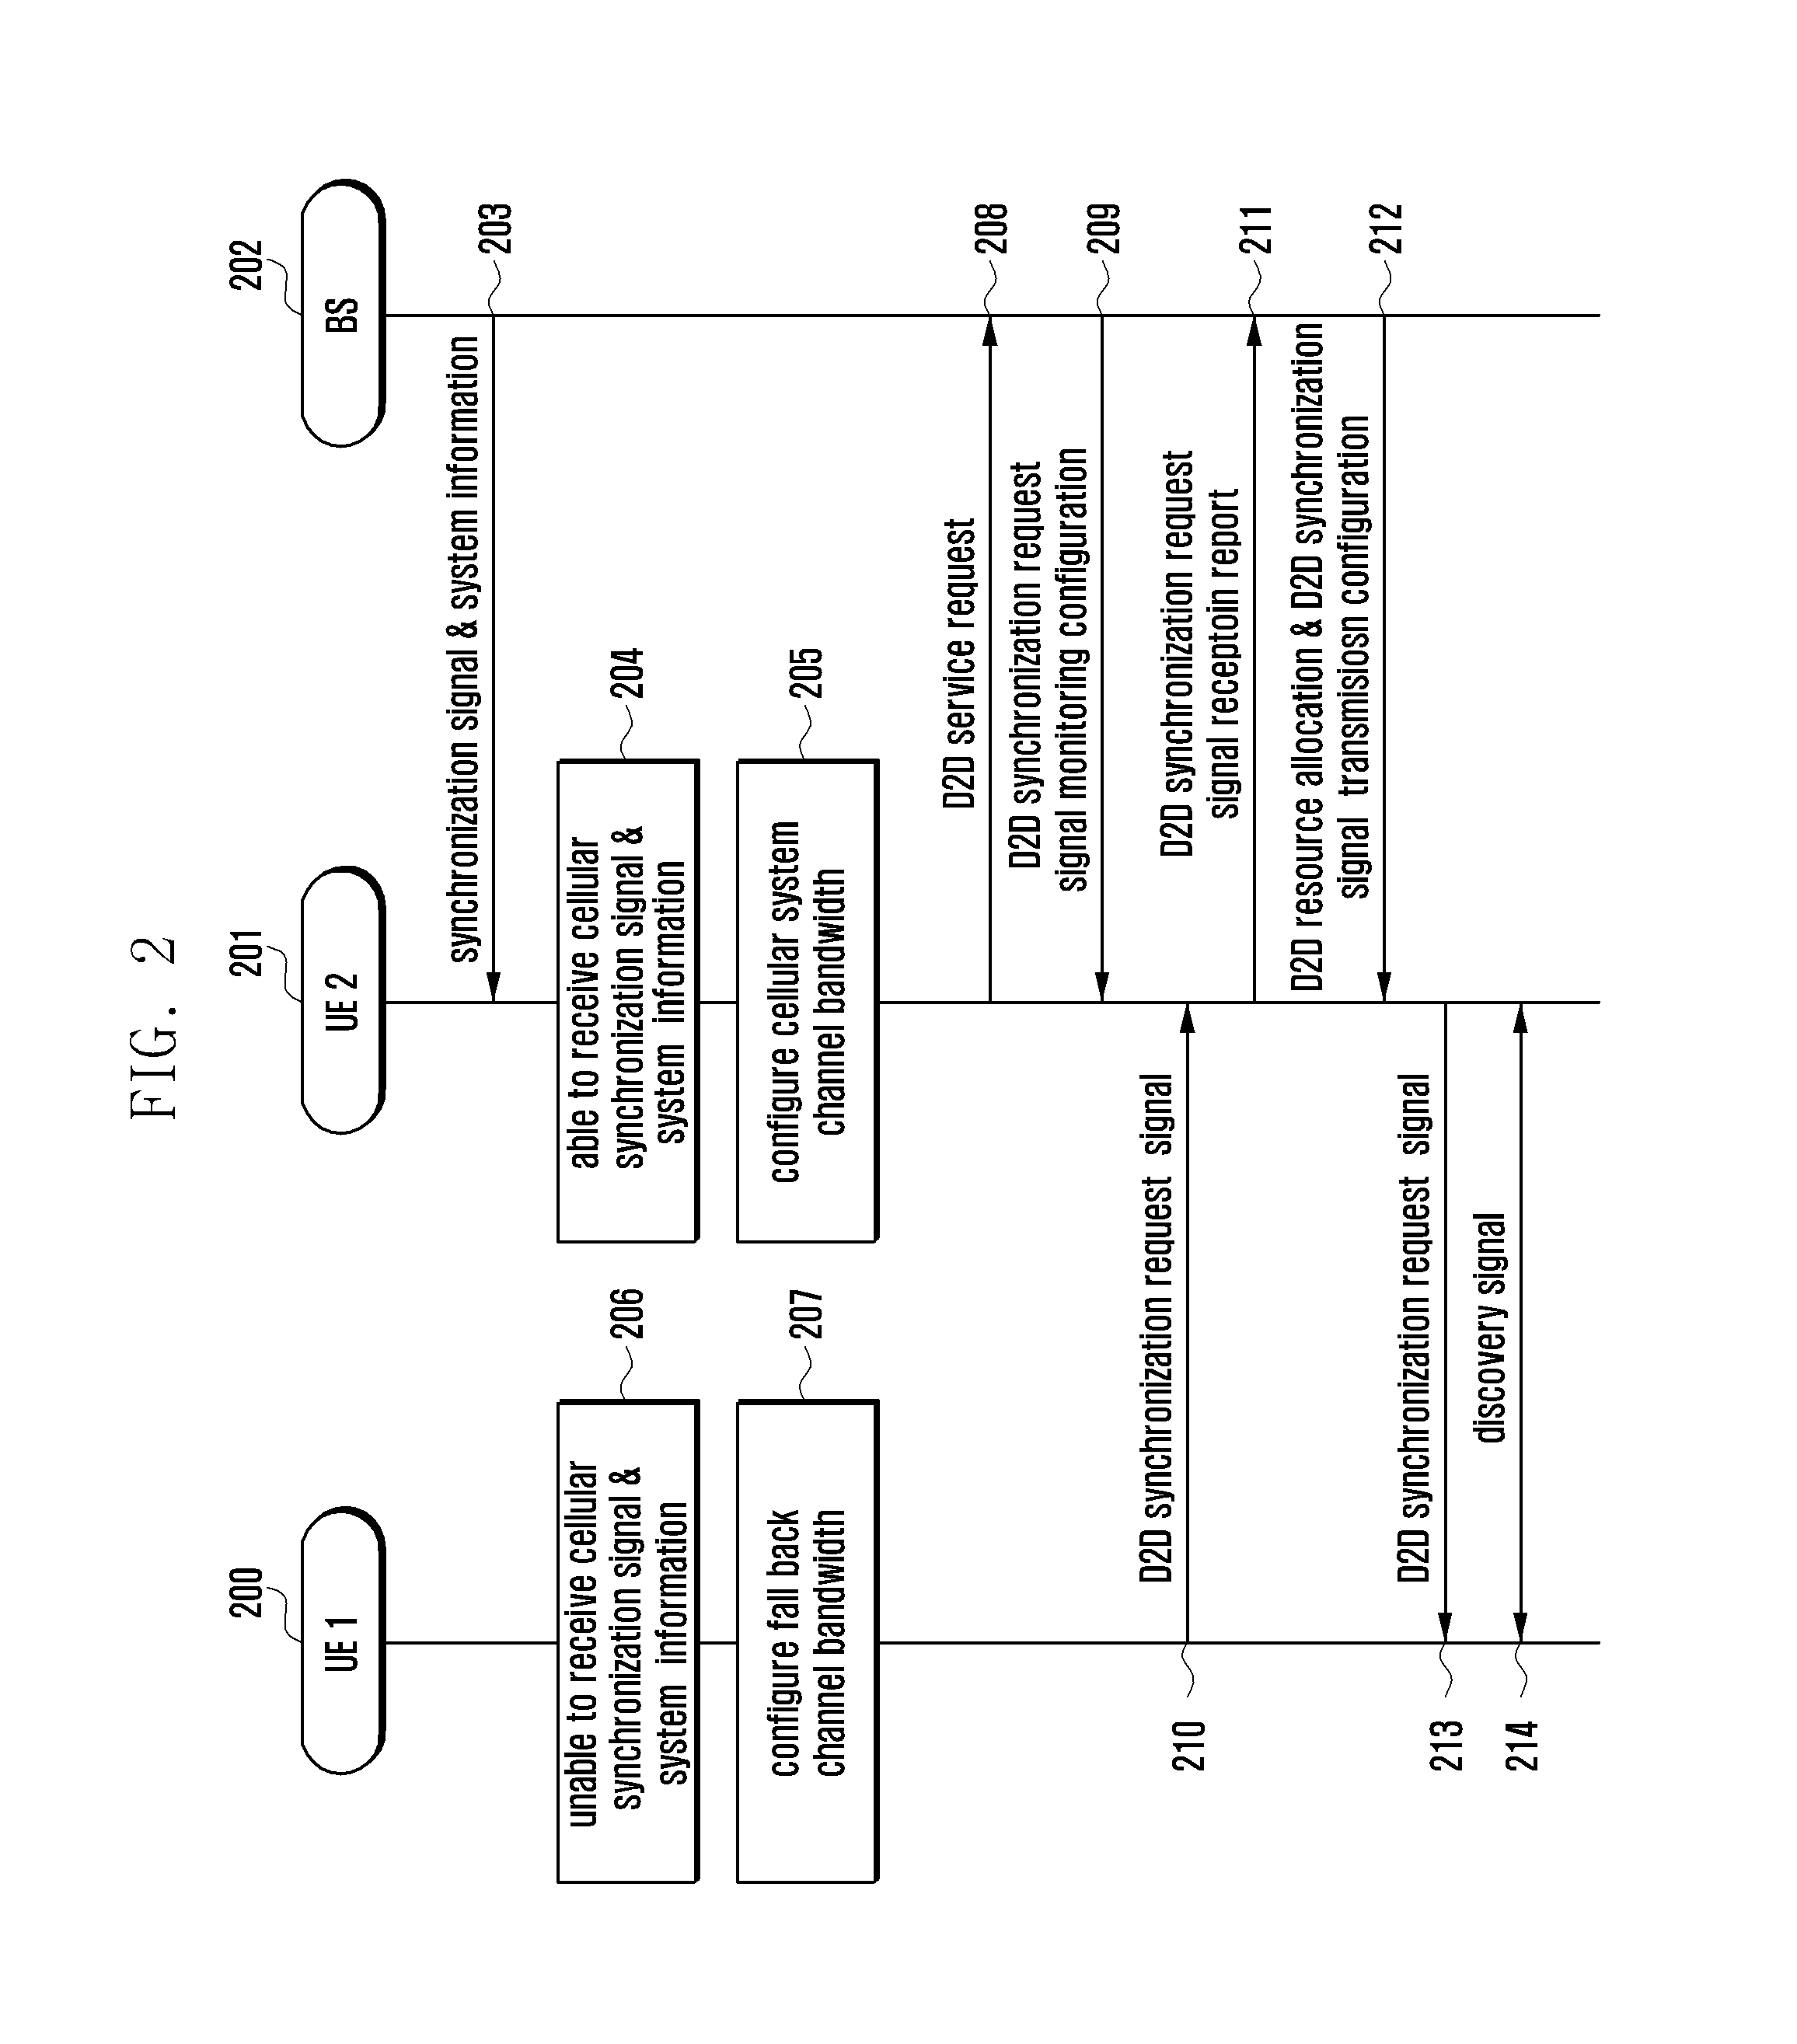 Method and apparatus for indicating discovery signal resources in device-to-device wireless communications